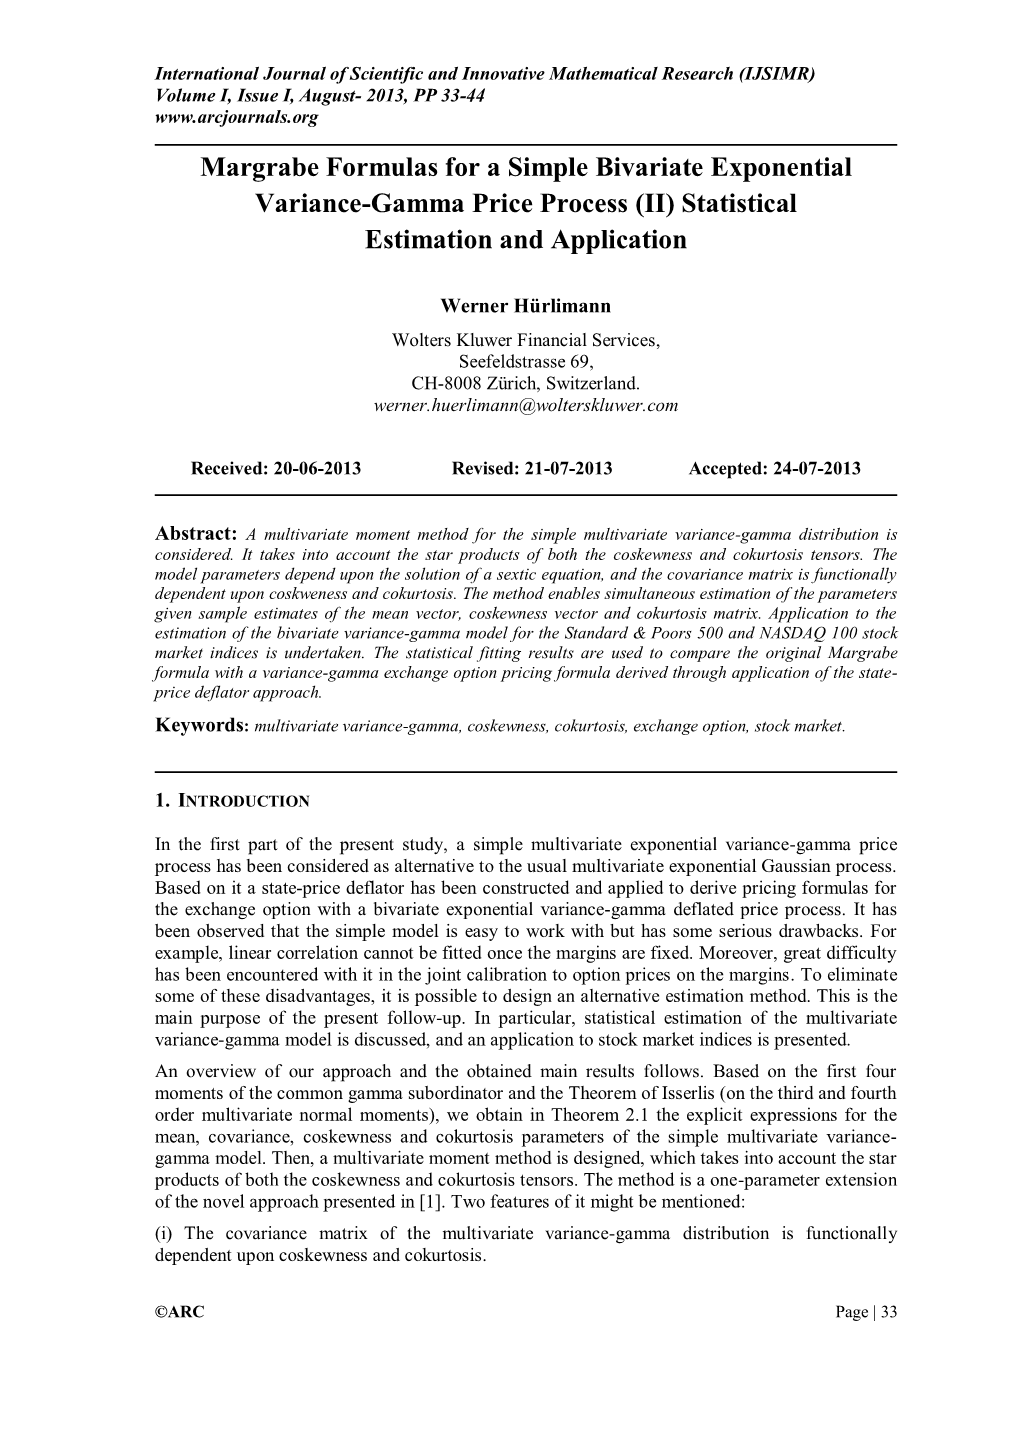 Margrabe Formulas for a Simple Bivariate Exponential Variance-Gamma Price Process (II) Statistical Estimation and Application